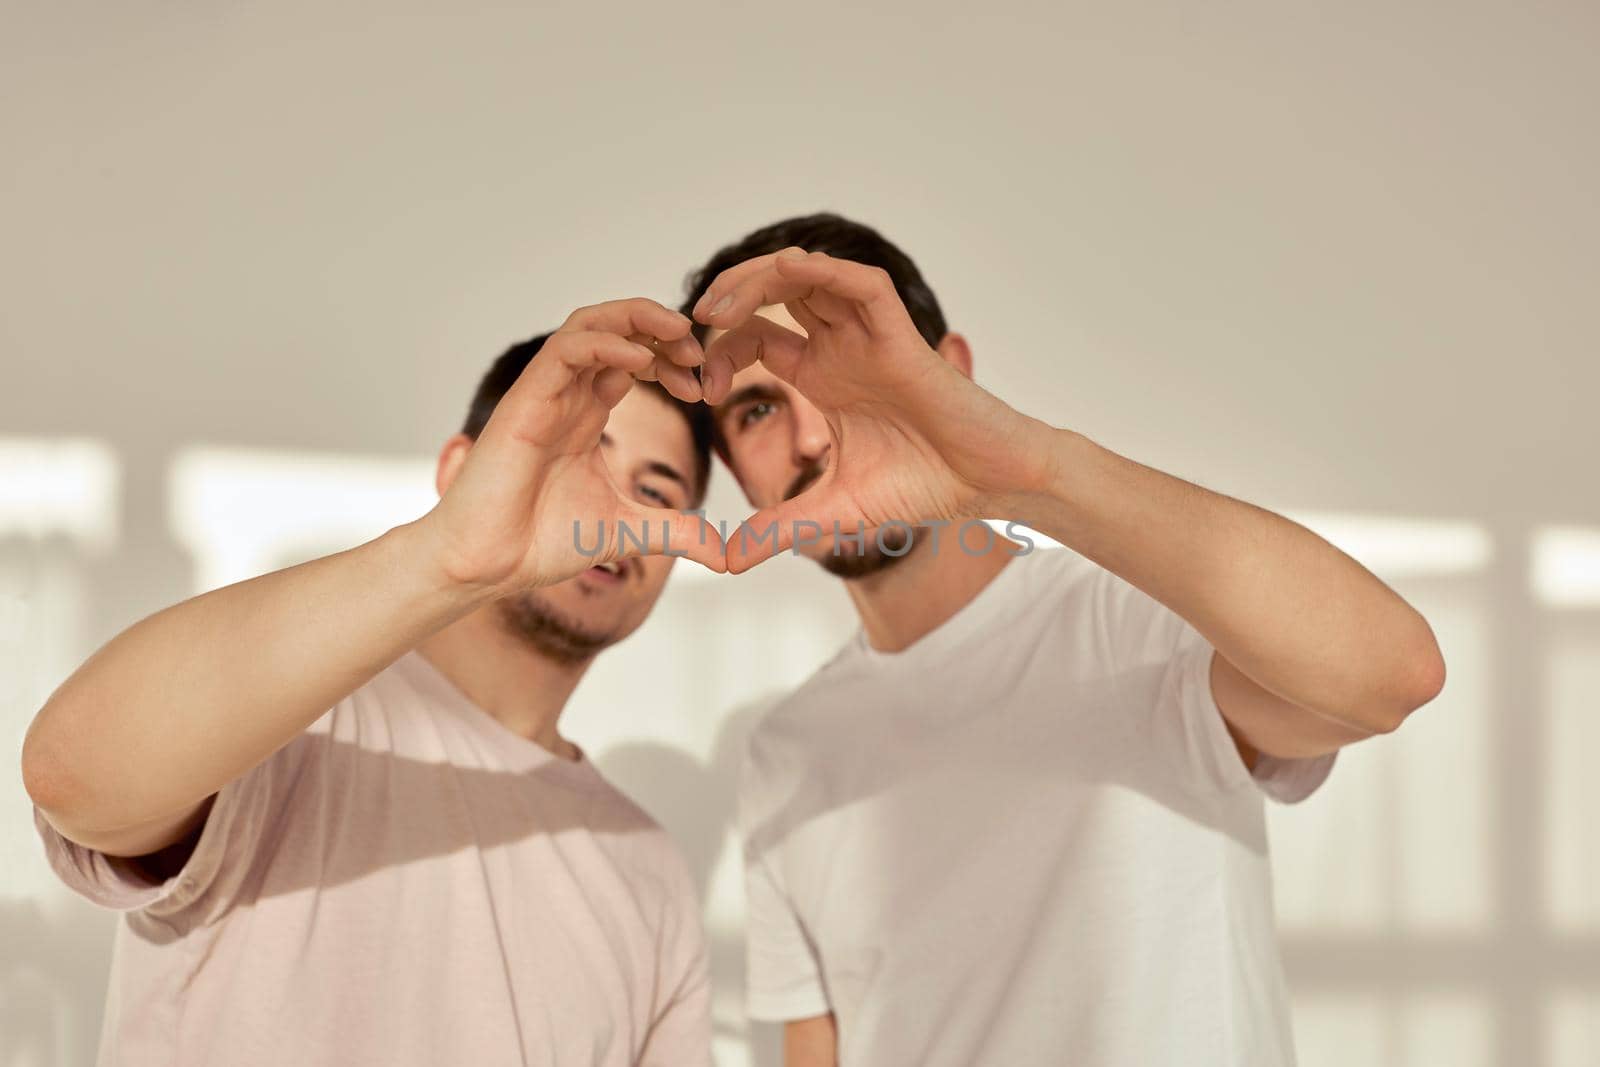 Gorgeous homosexual couple men make heart shape from fingers and palms